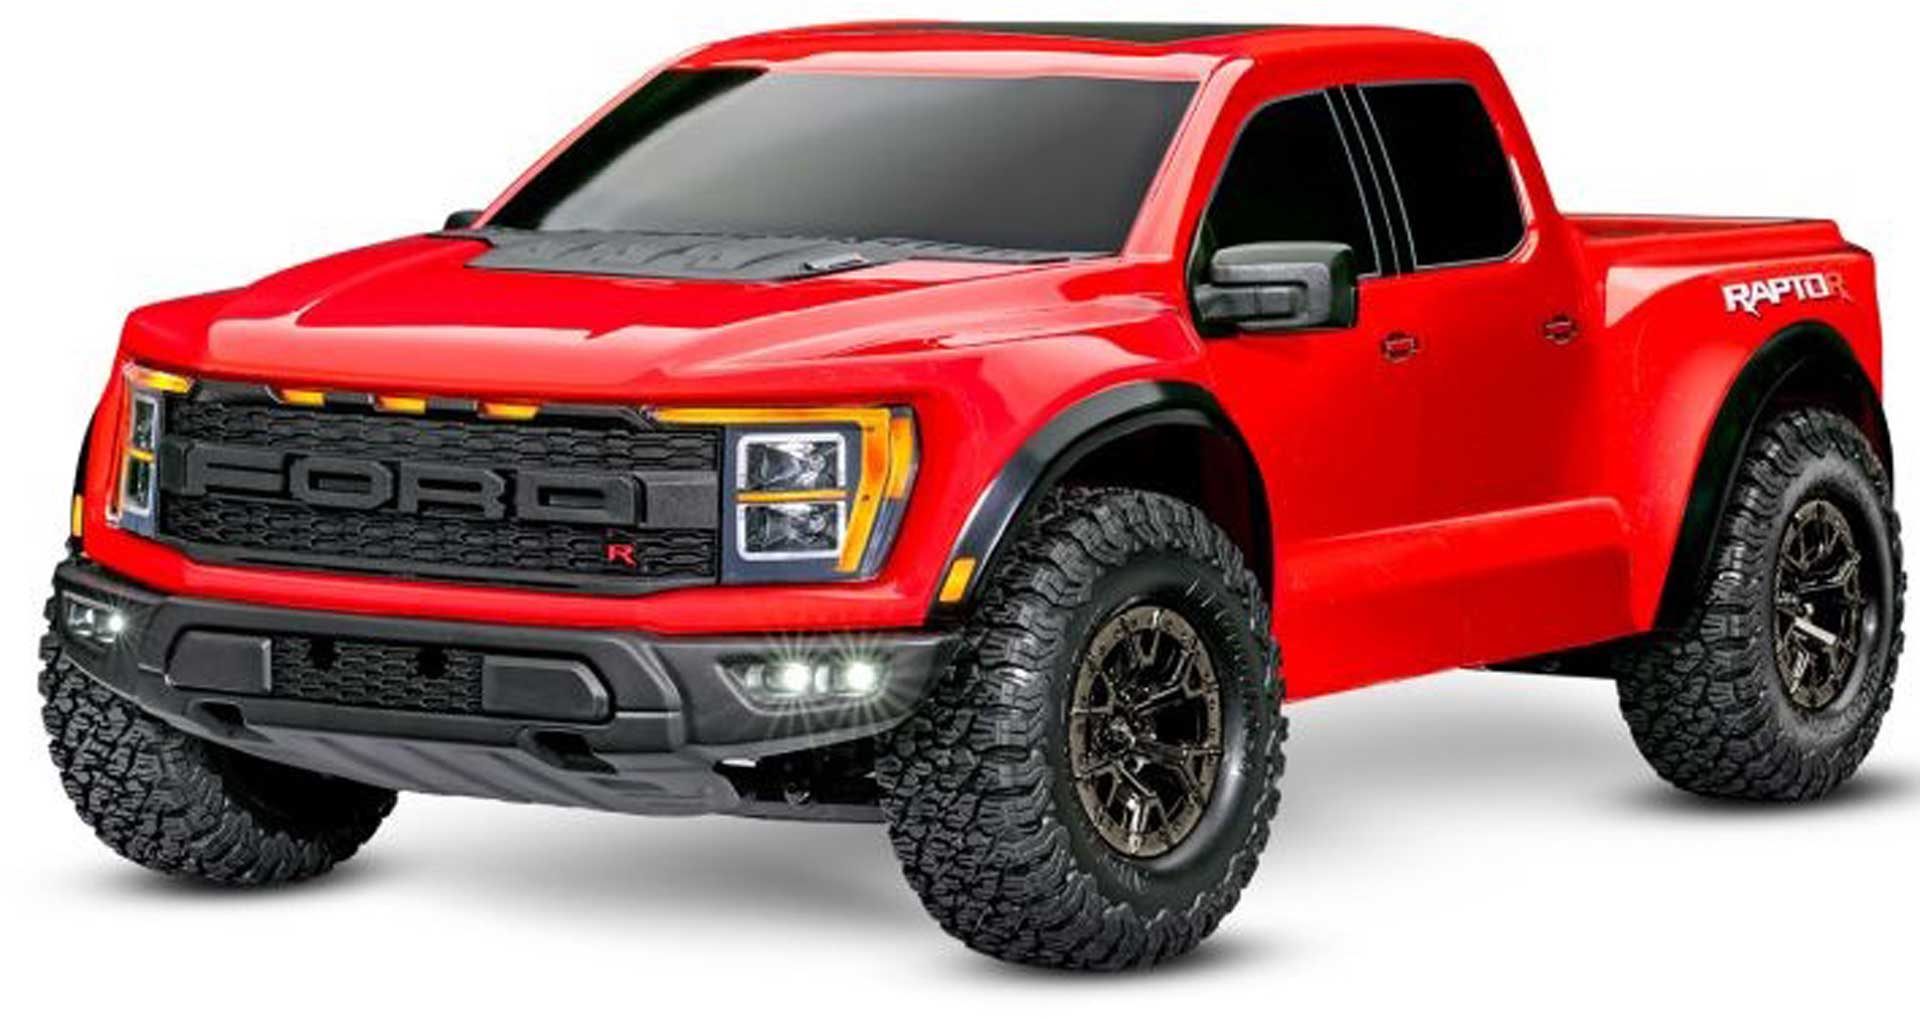 TRAXXAS FORD RAPTOR-R 4X4 VXL ROUGE 1/10 PRO-SCALE RTR BRUSHLESS, SANS ACCU/CHARGEUR